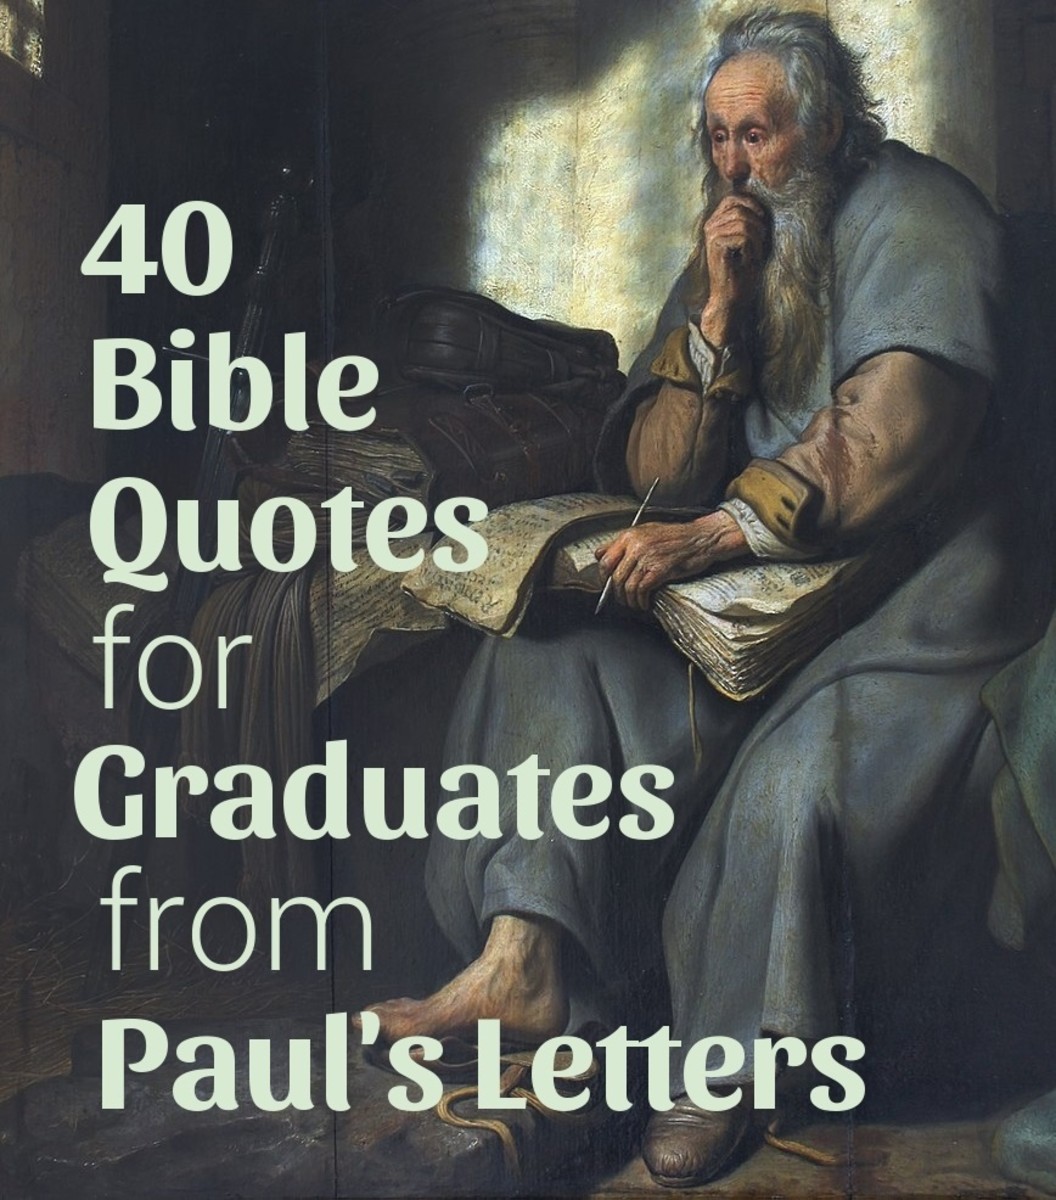 Pauline letters in the bible